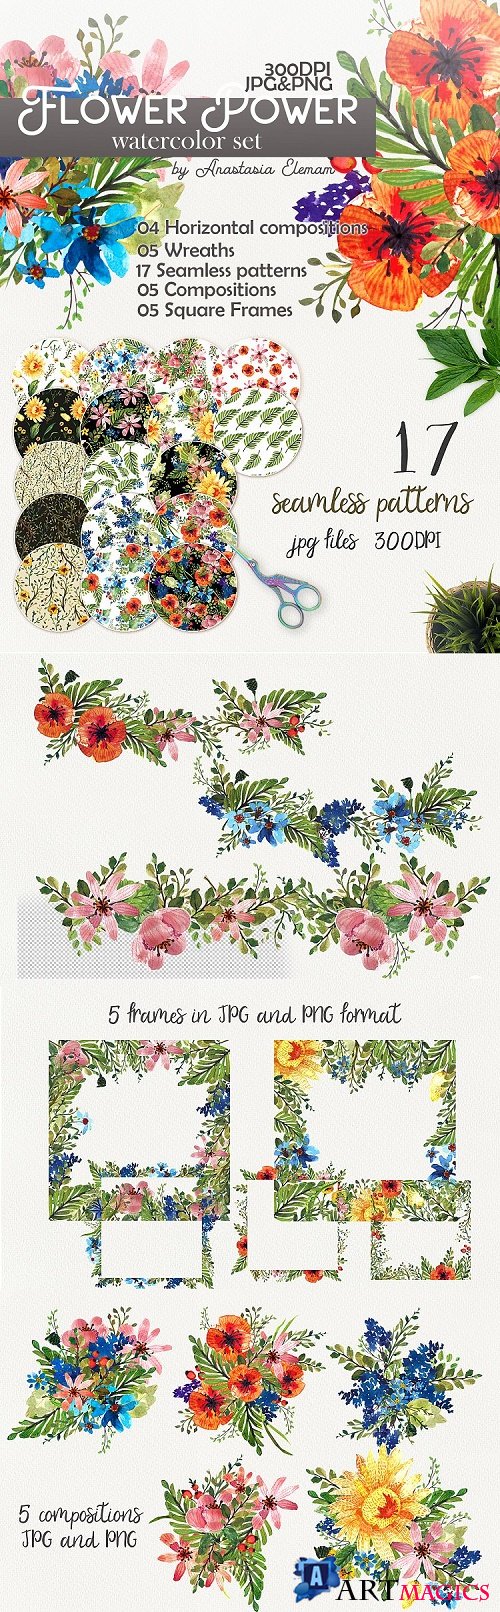 Flower Power watercolor pack set with frames wreath patterns  - 476730